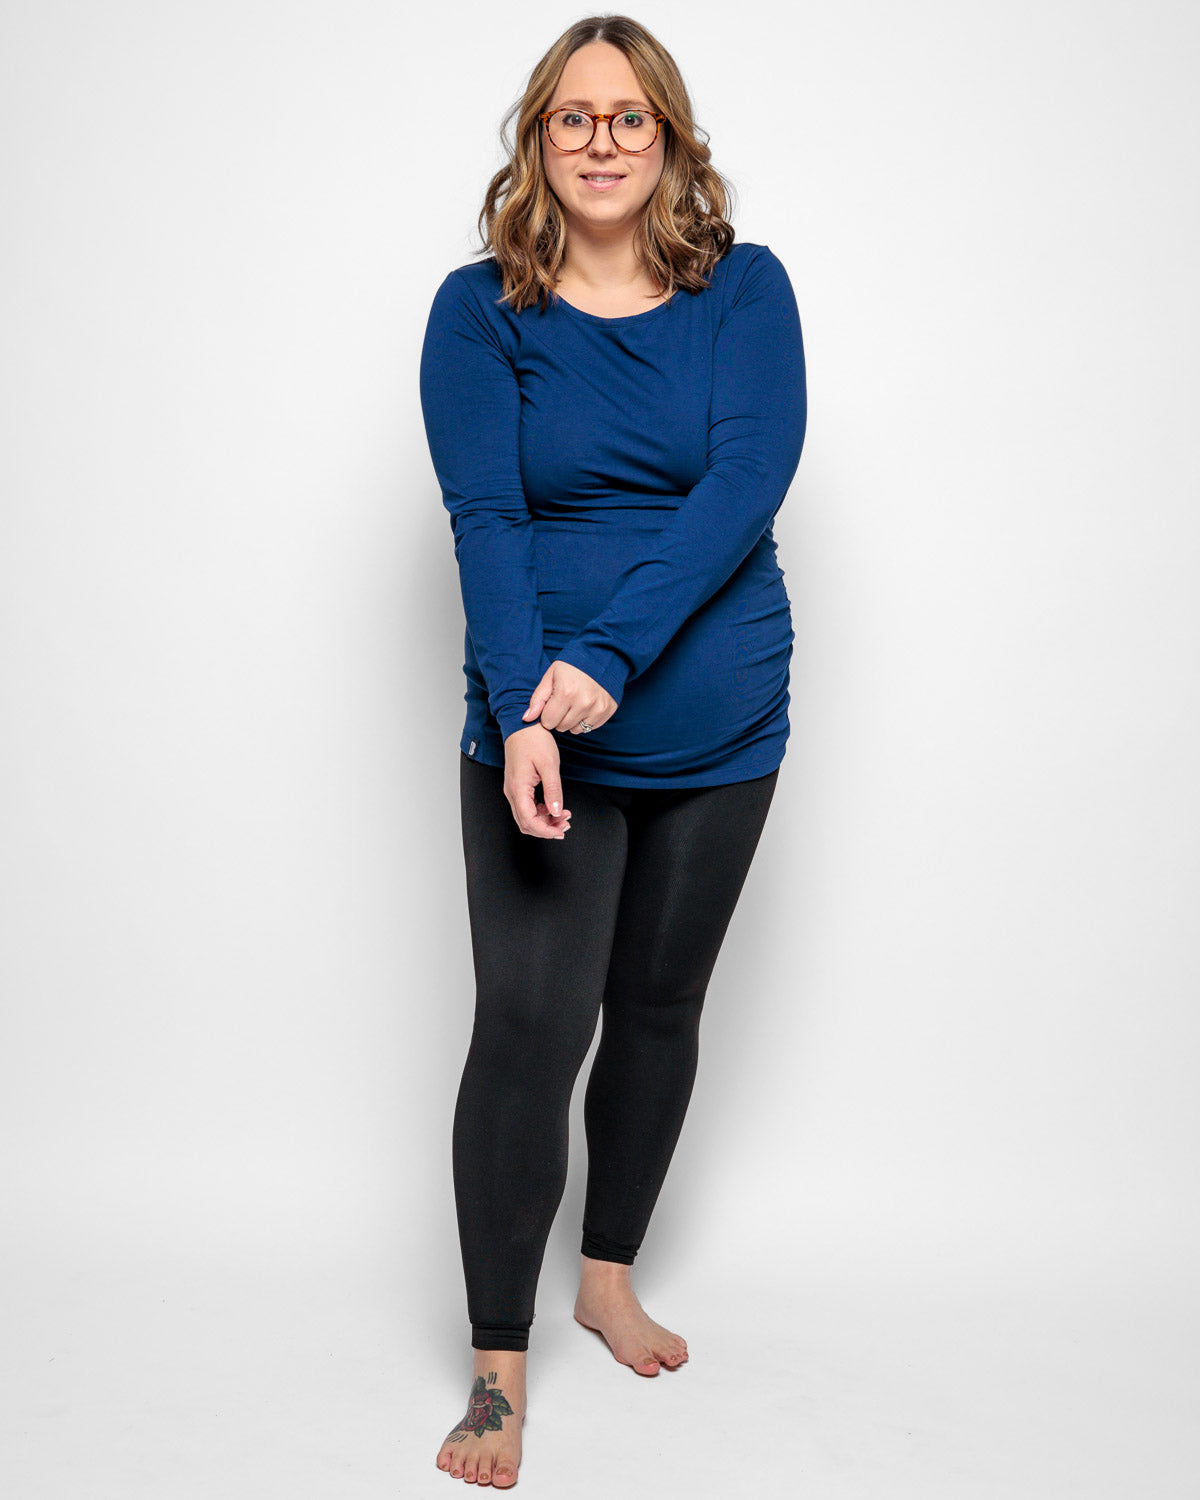 Maternity Long Sleeve Top in Navy Blue Organic Cotton for pregnancy